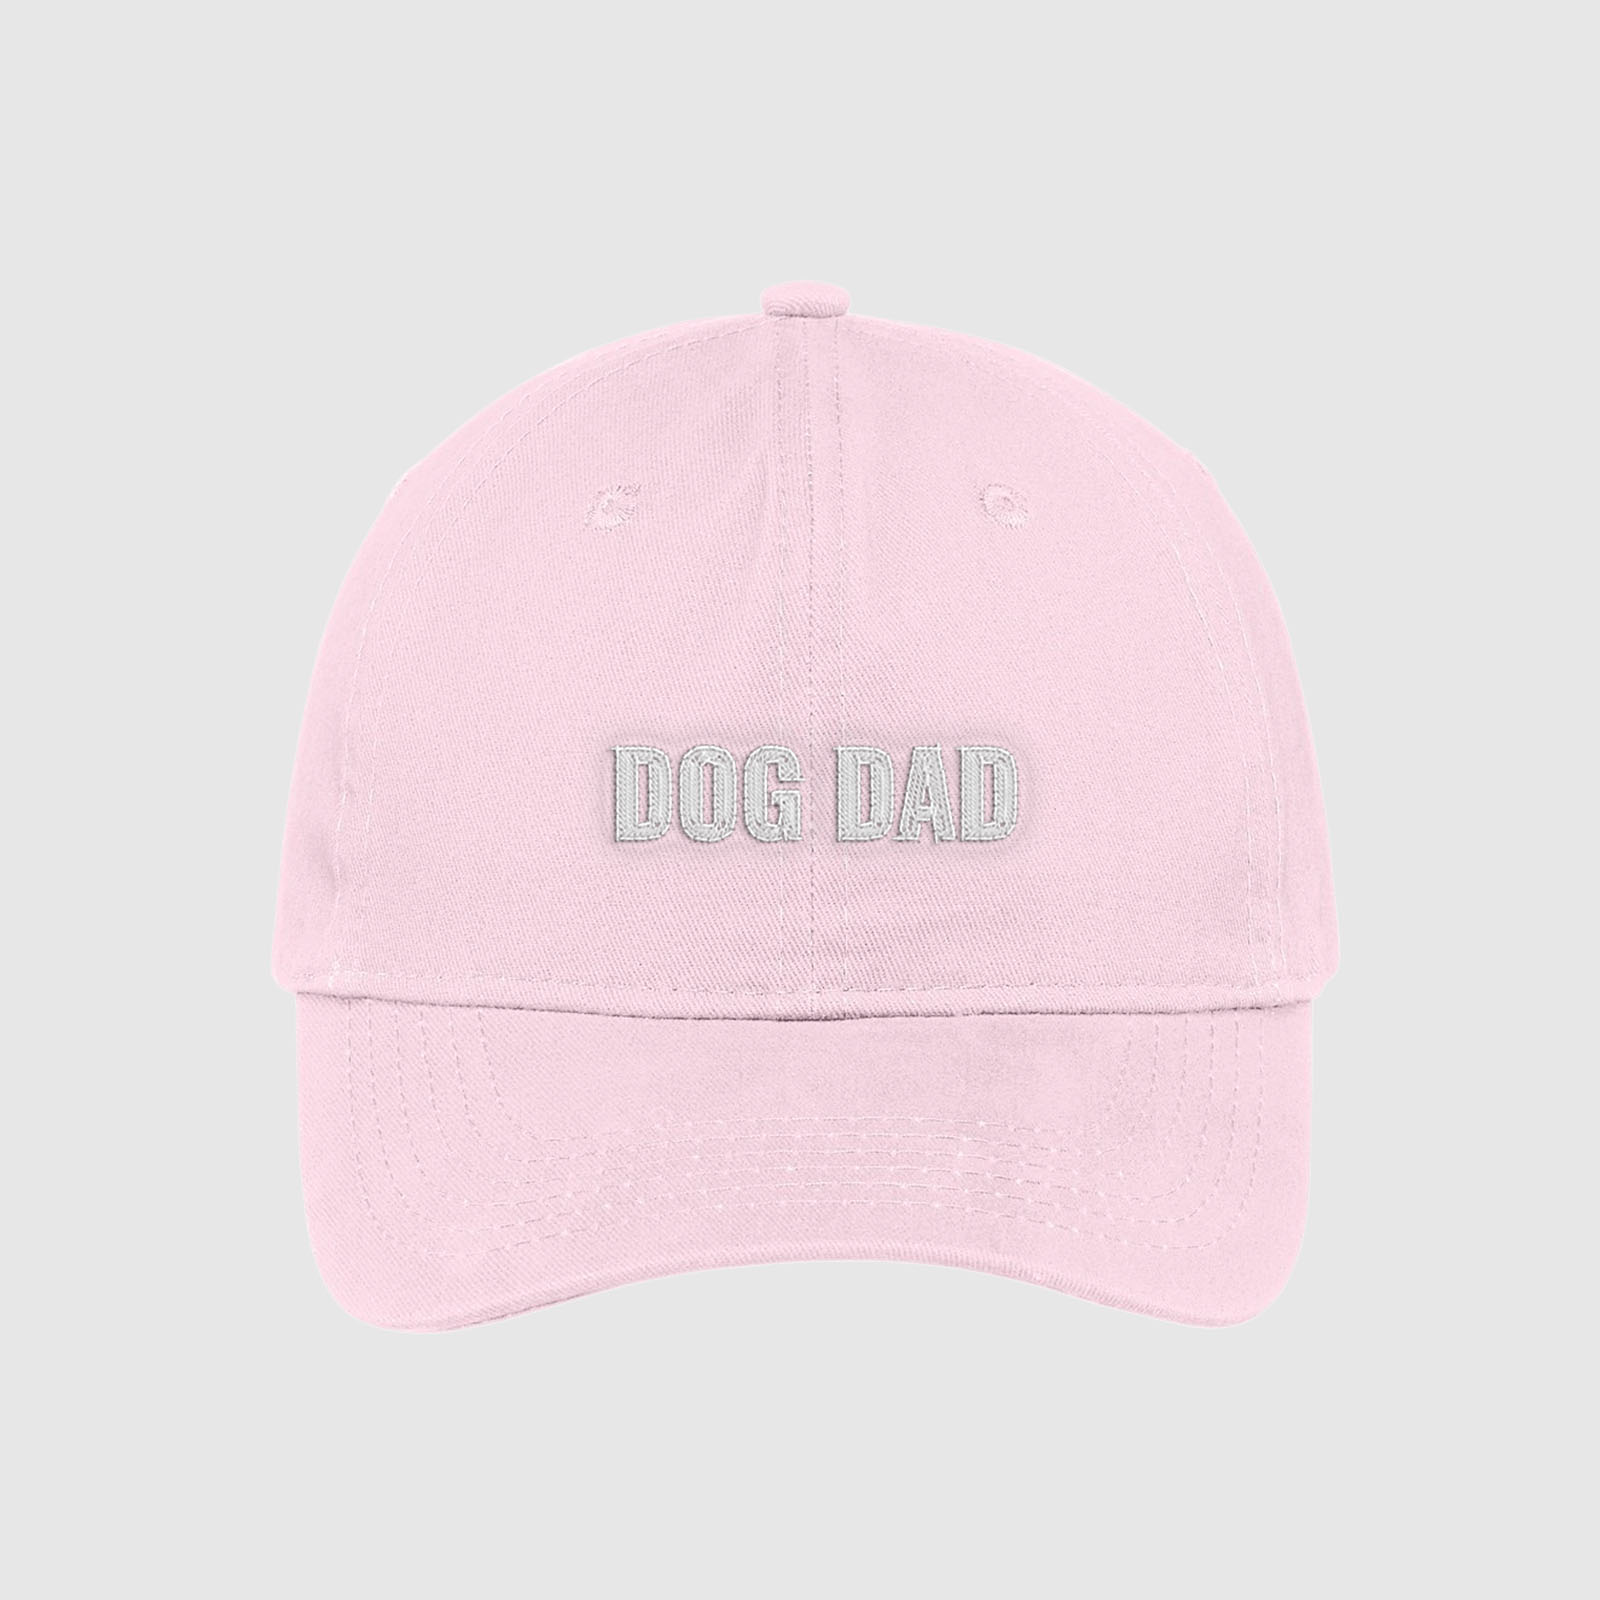 Blush pink Dog Dad Hat embroidered with white text